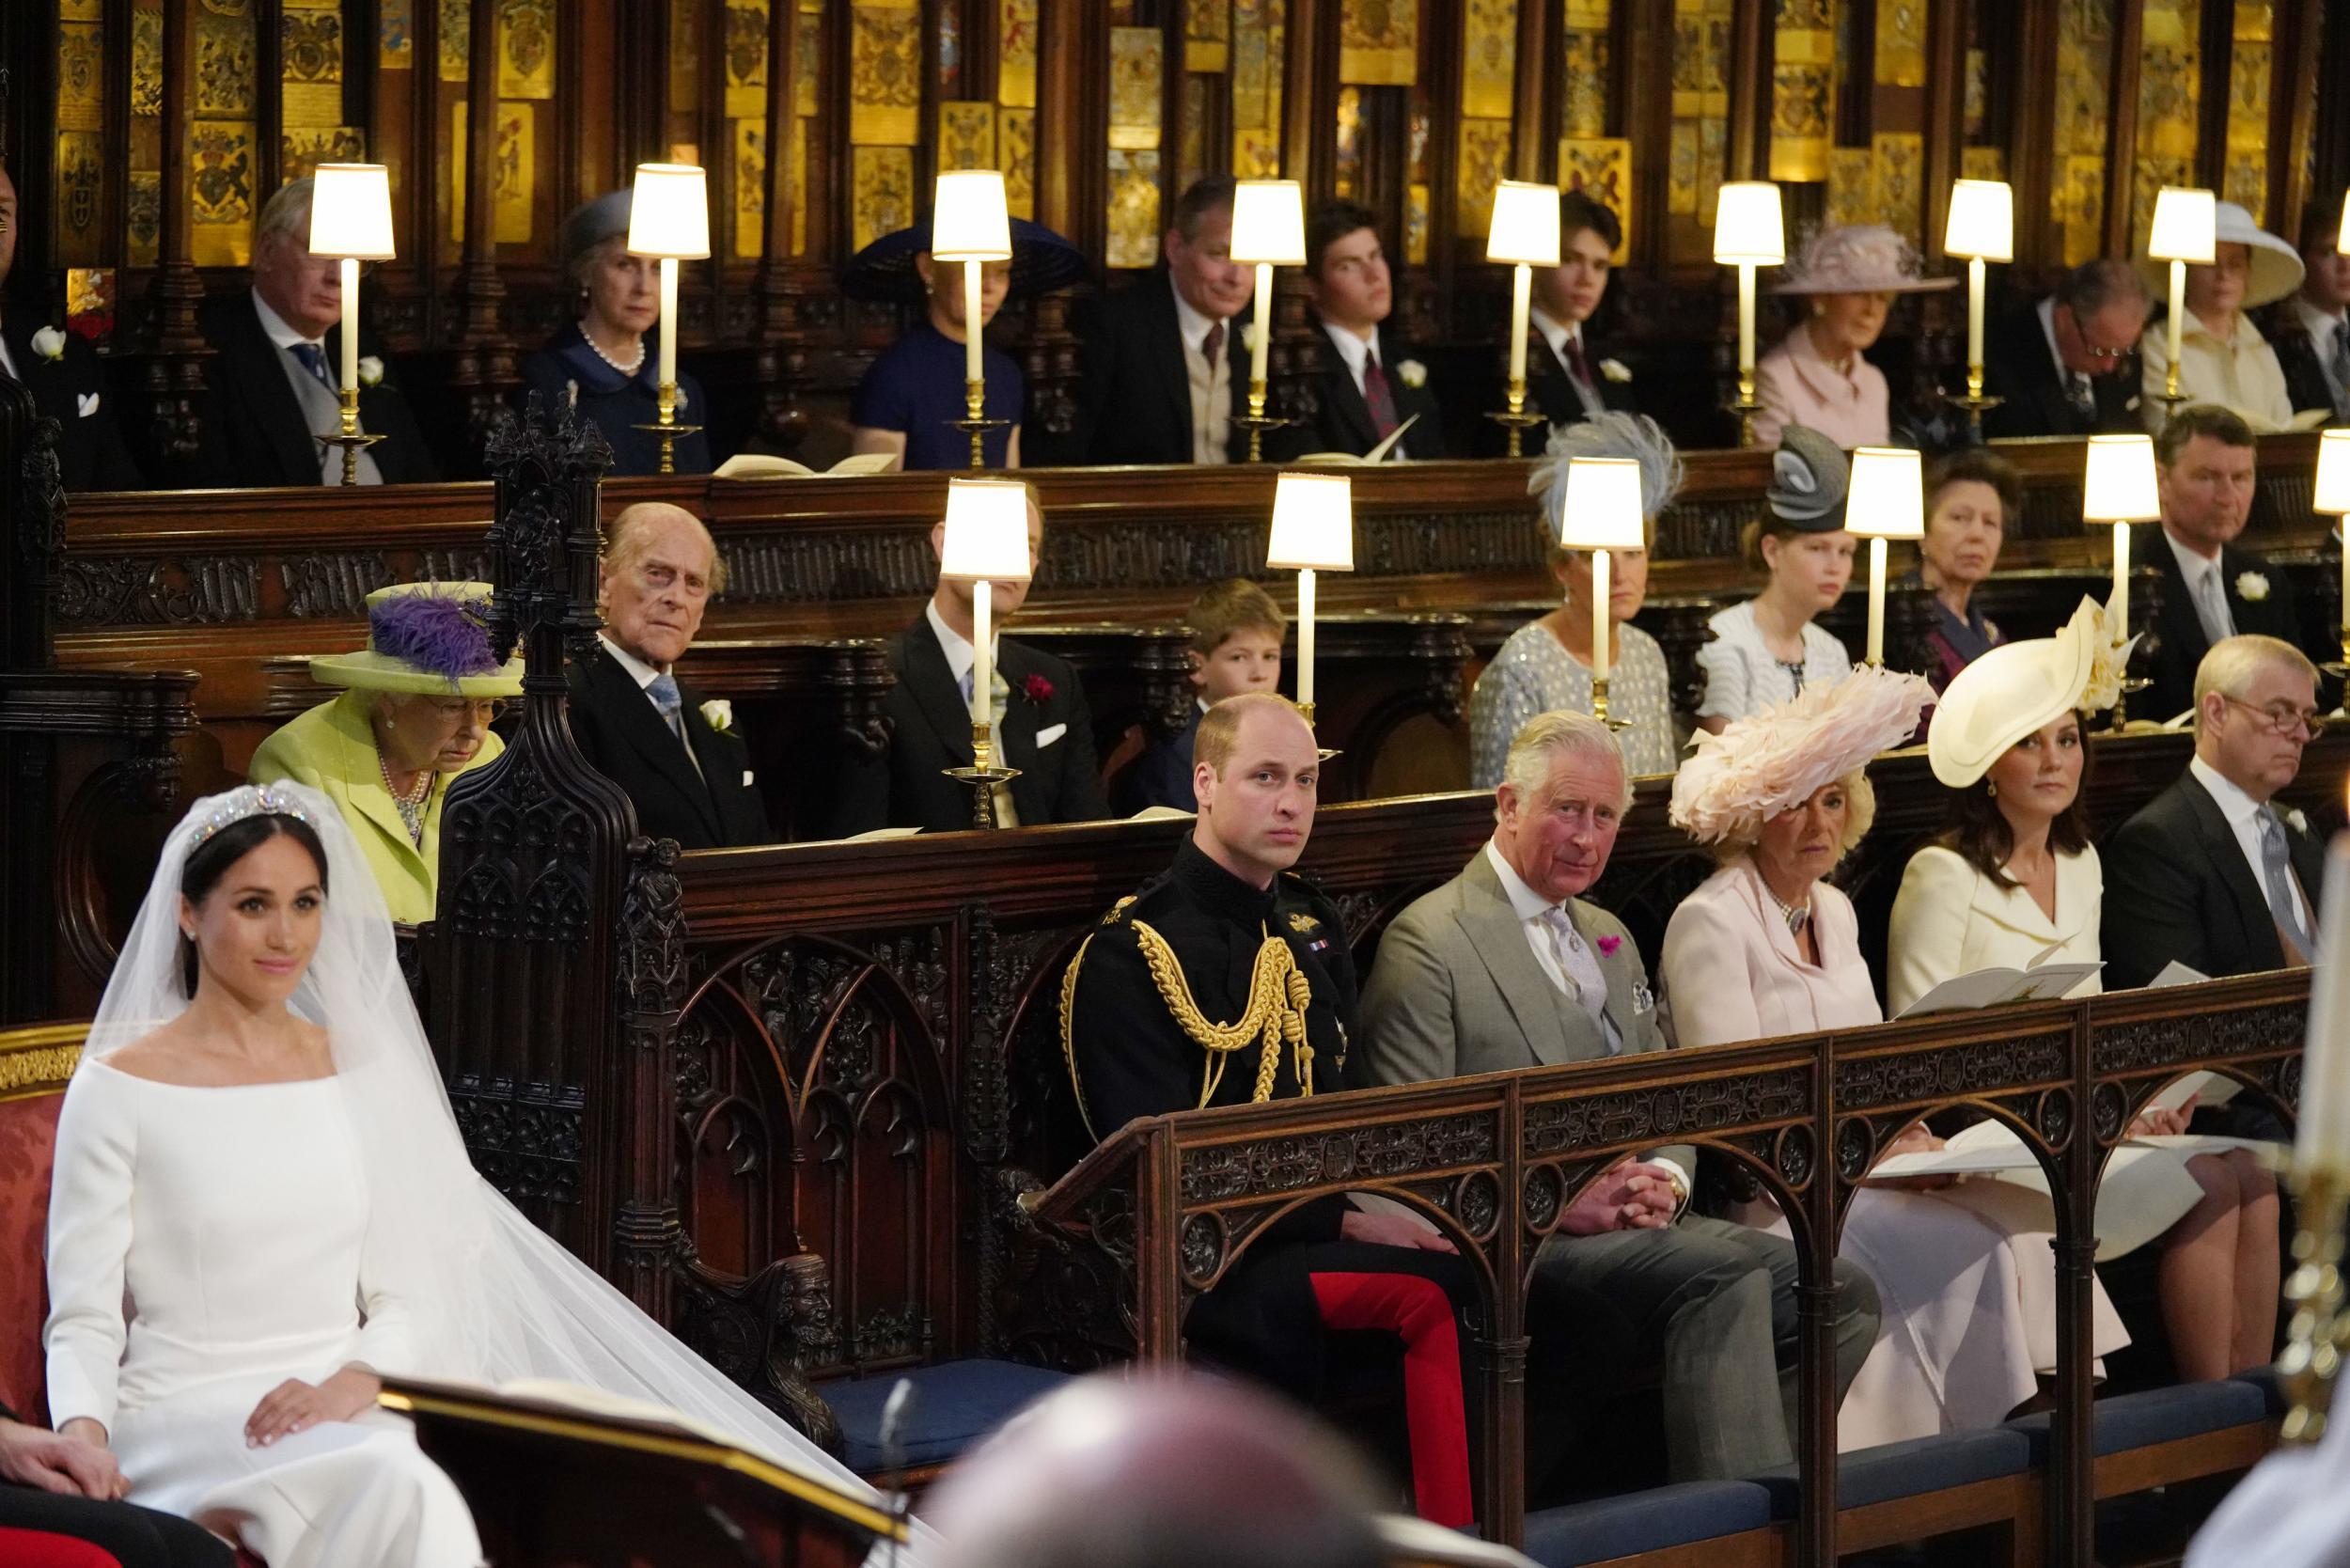 The seat was also left empty during Meghan Markle’s wedding (Getty)